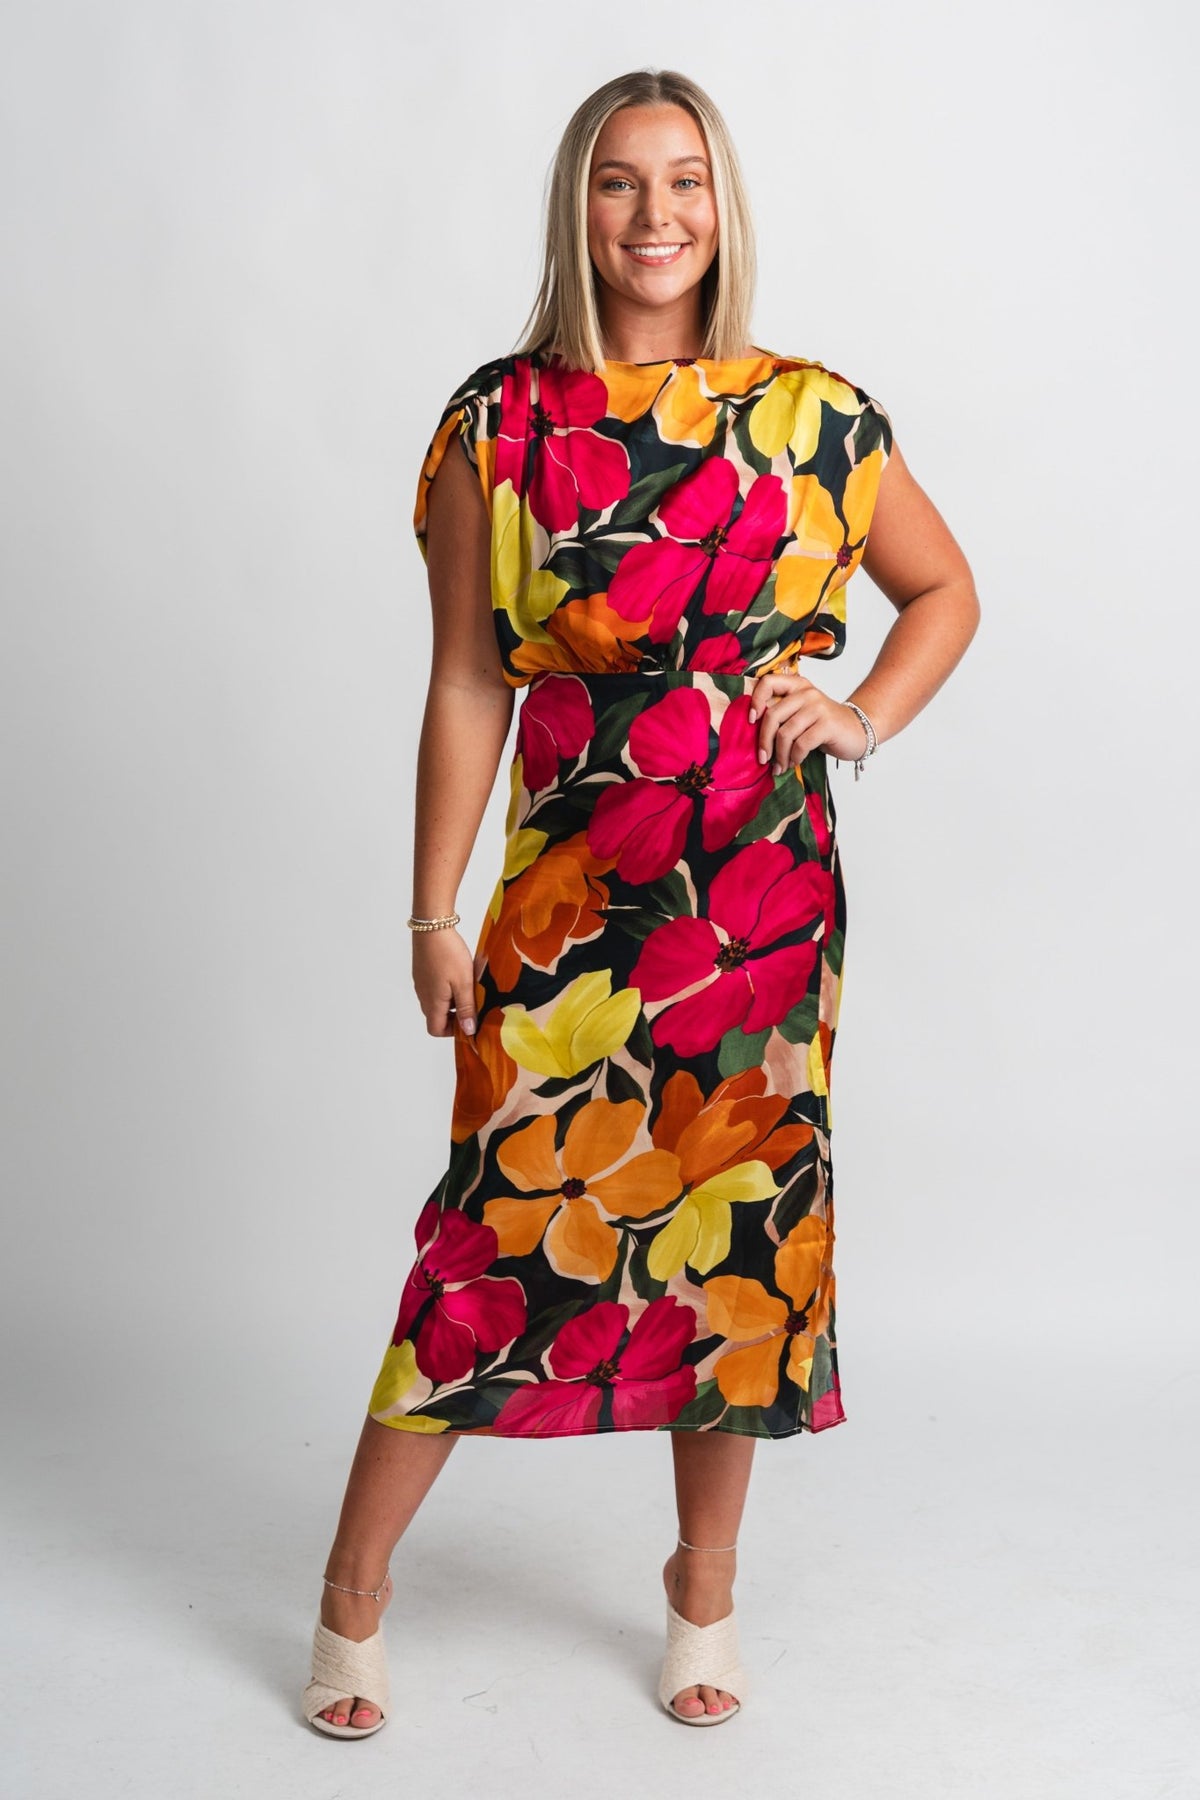 Tropical floral maxi dress fuchsia floral - Trendy dress - Cute Vacation Collection at Lush Fashion Lounge Boutique in Oklahoma City